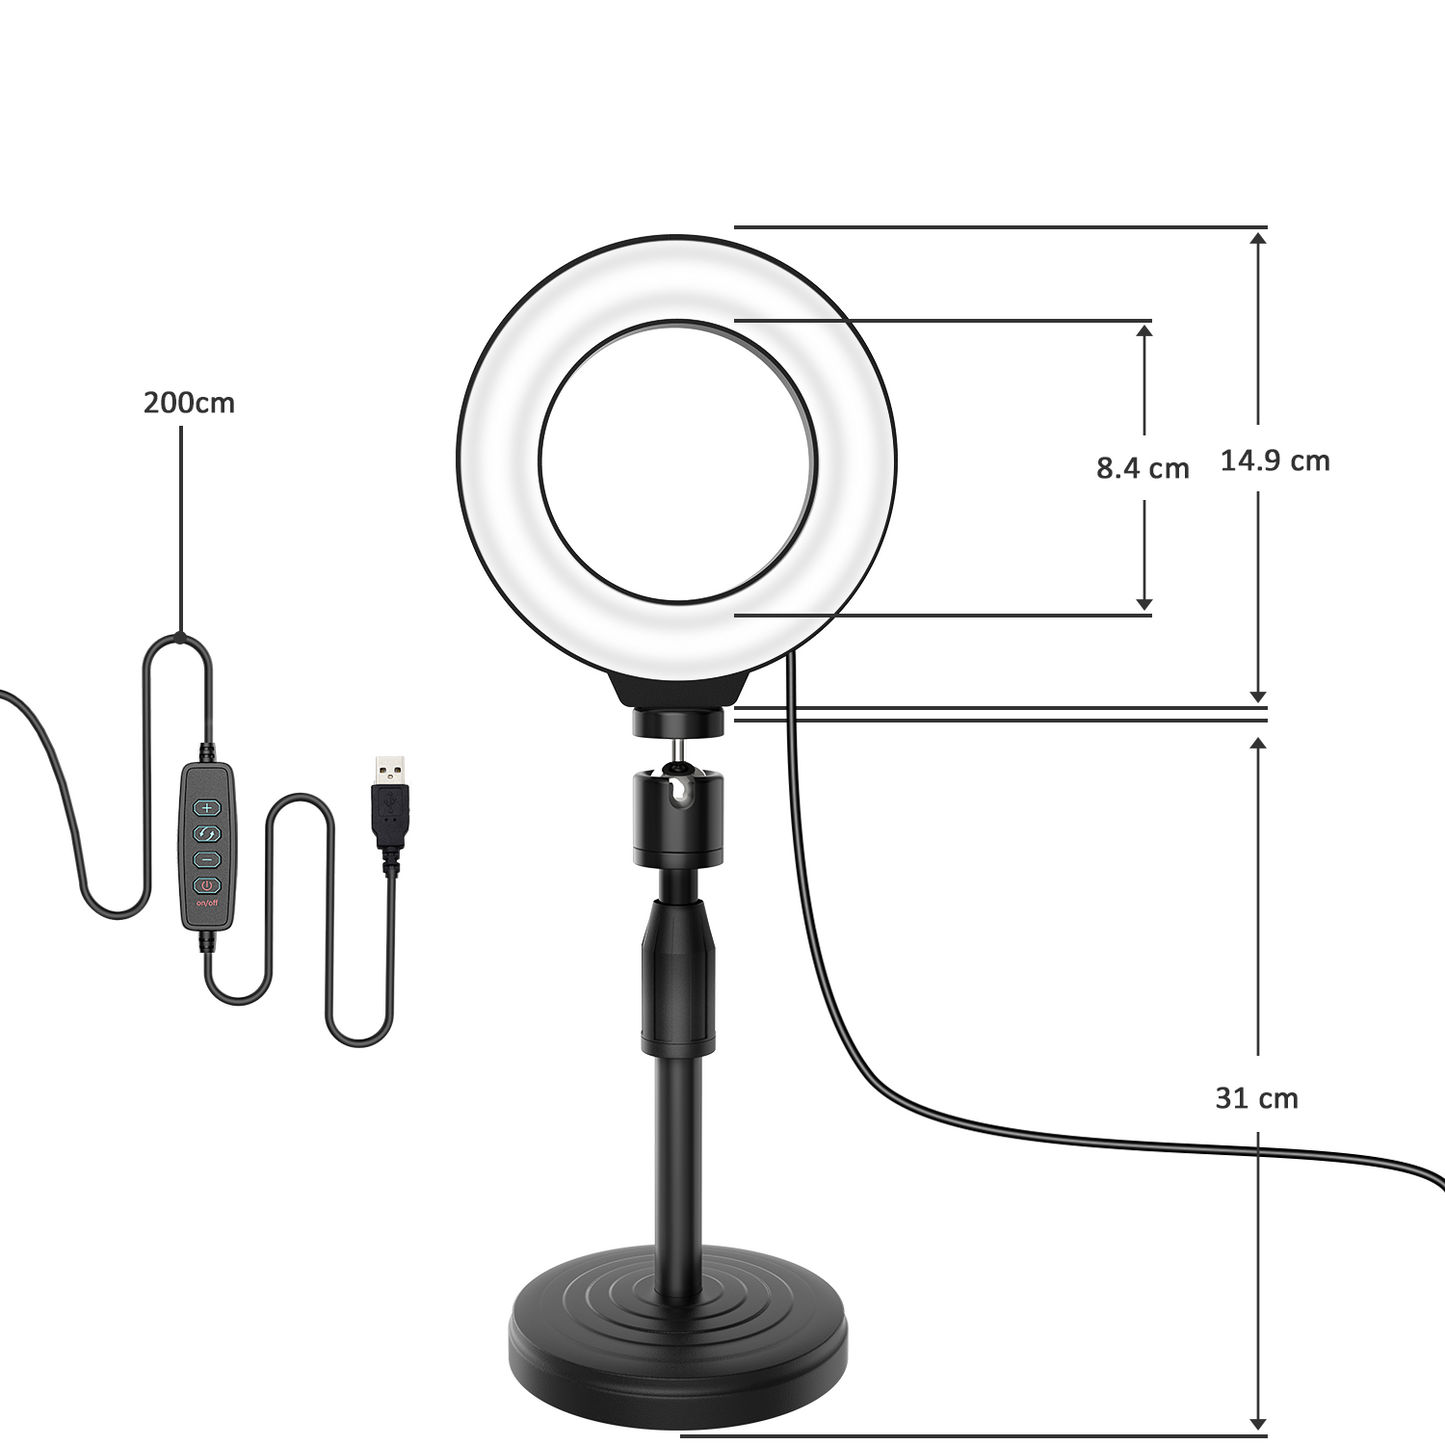 Jeemak 6'' Selfie Ring Light with Stand Desktop LED Circle Light for Phone Computer 3 Colors USB Ringlight with Remote Control For Photography Makeup YouTube Video TikTok Live Stream